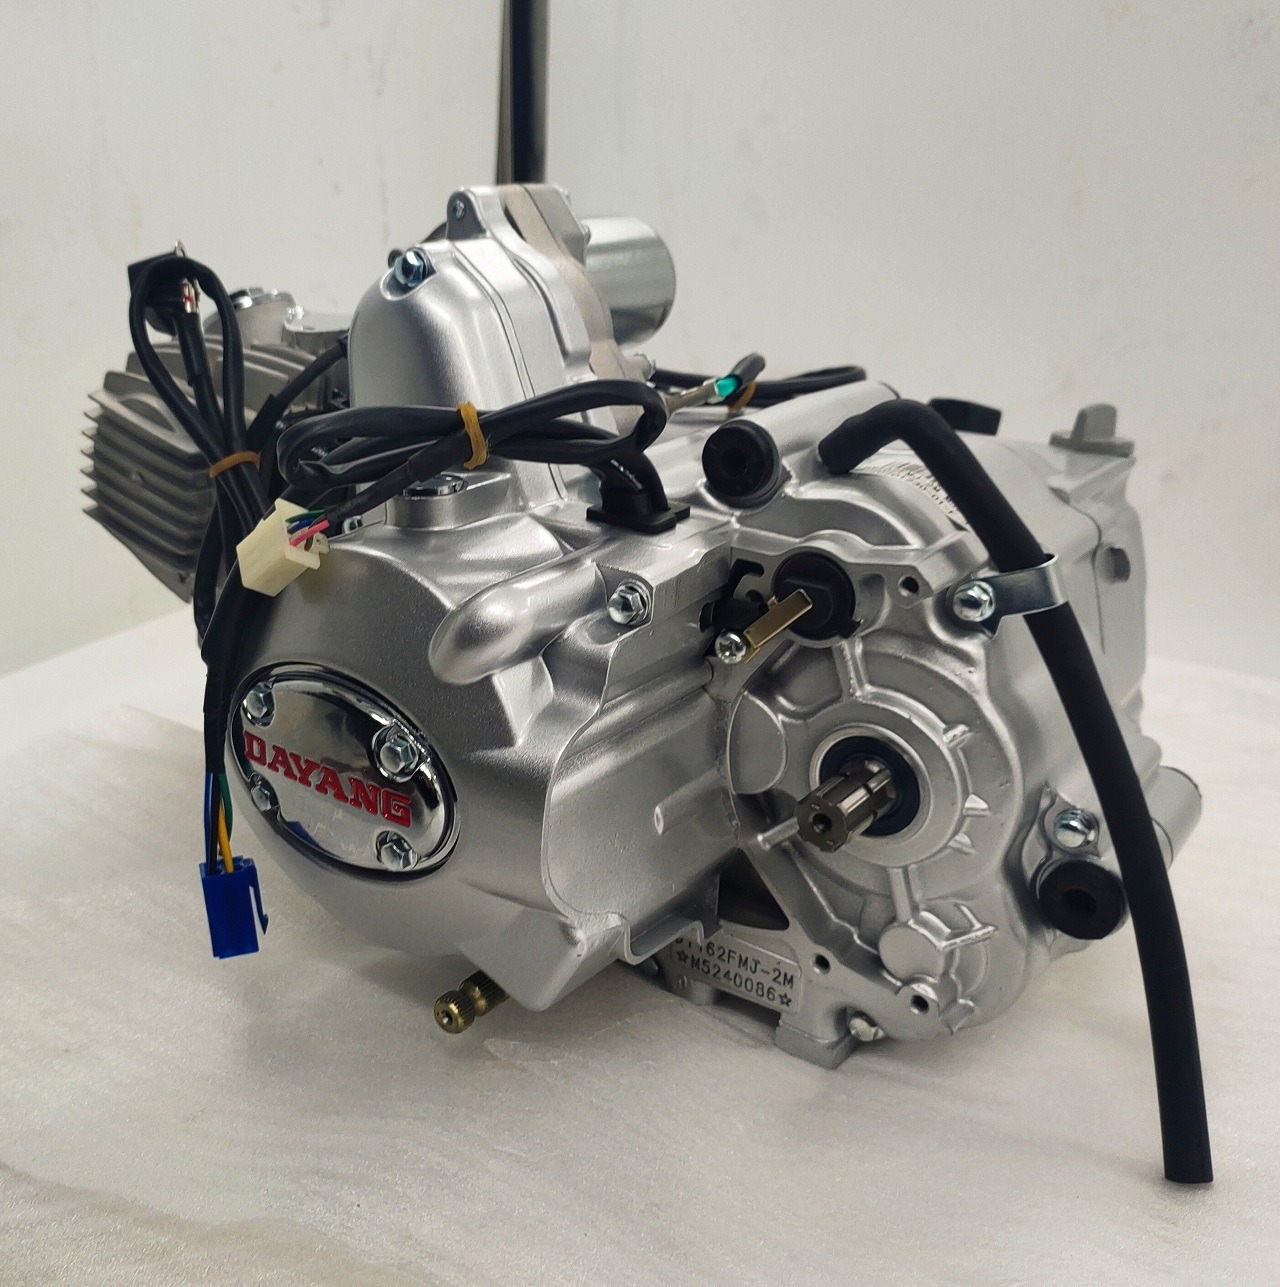 DAYANG Complete Motorcycle Nature 110CC air cooling  Engine China 1Cylinder Style  Origin High Quality Ignition Style Origin CCC